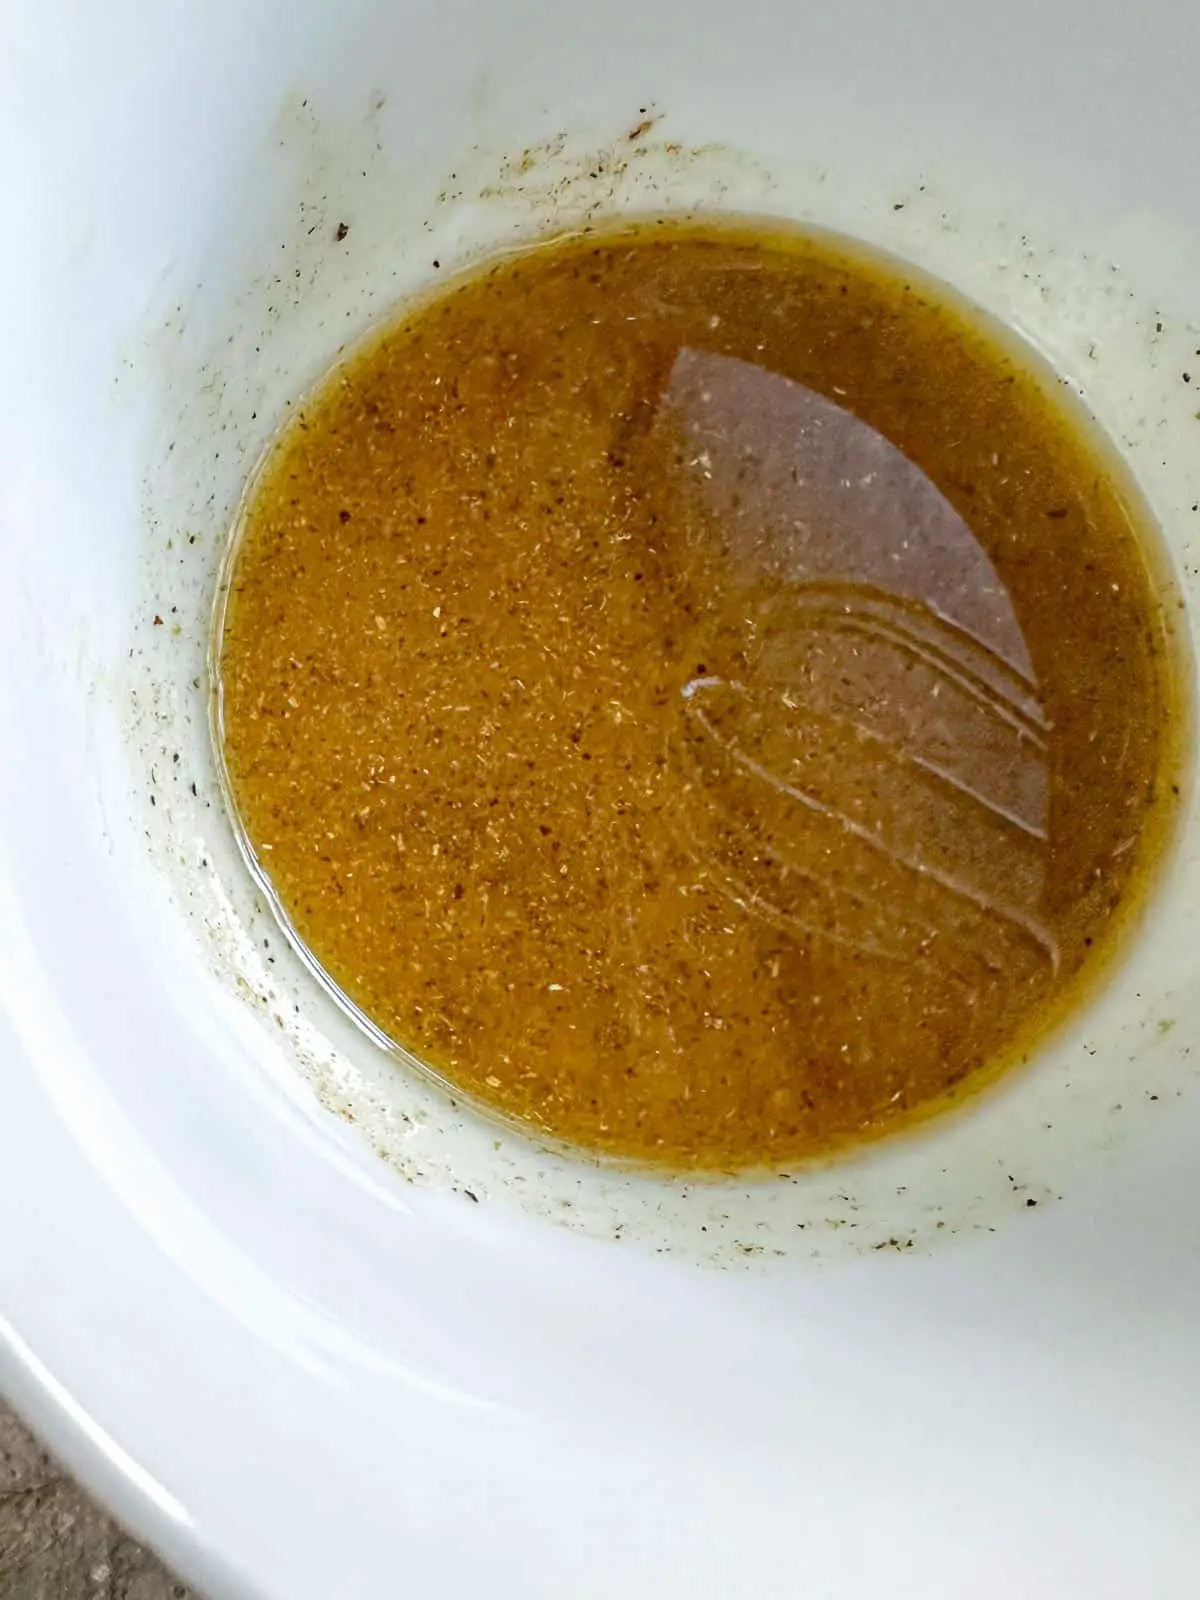 A white bowl containing a vinaigrette consisting of oil, vinegar, and seasonings.